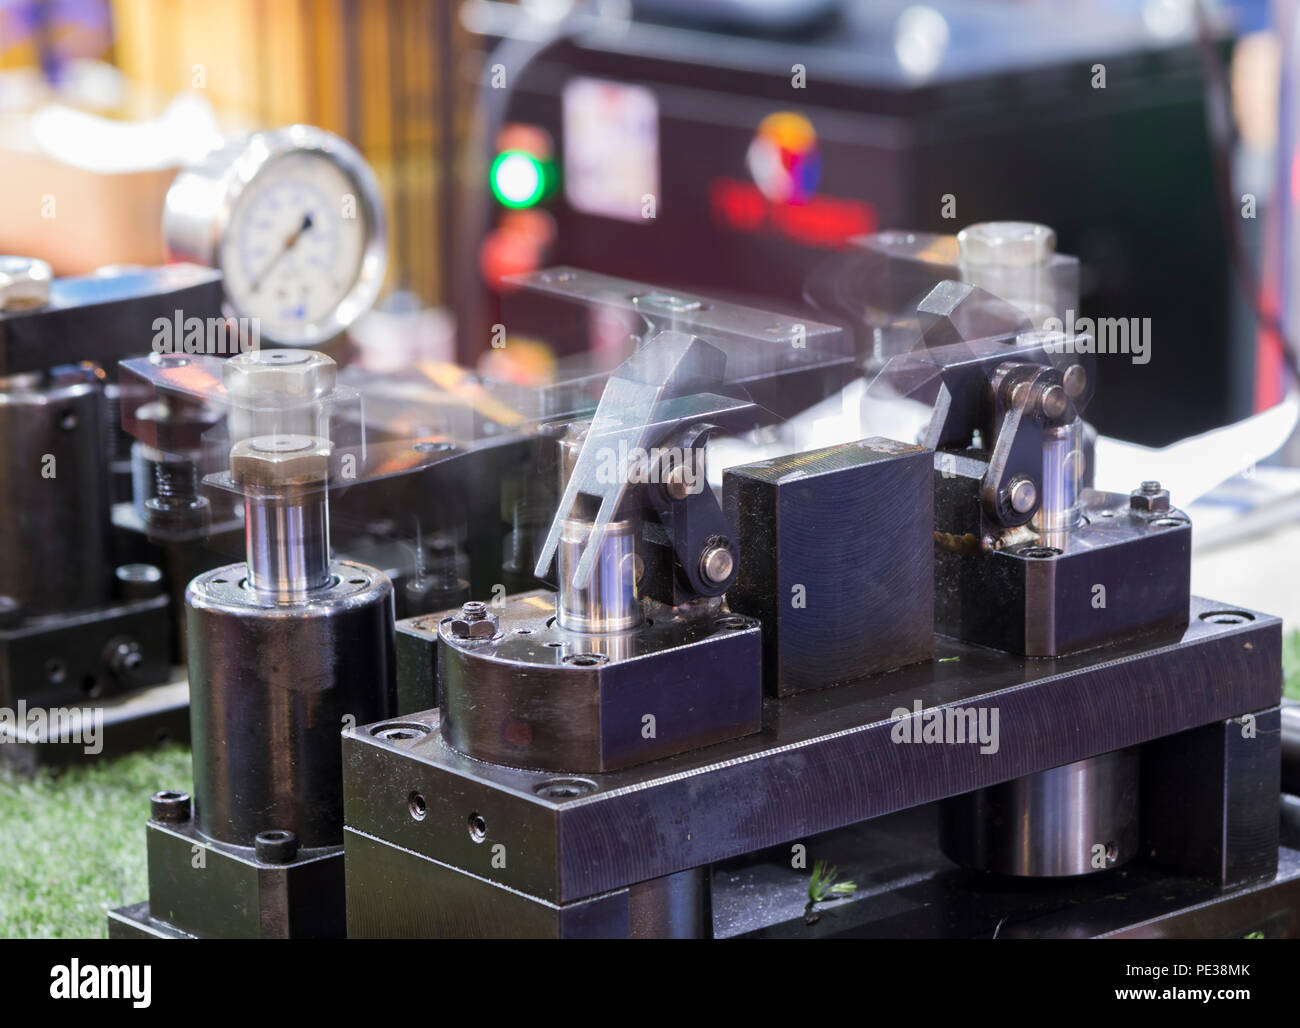 hydraulic clamping jig for machining process ; Blurred from moving component Stock Photo